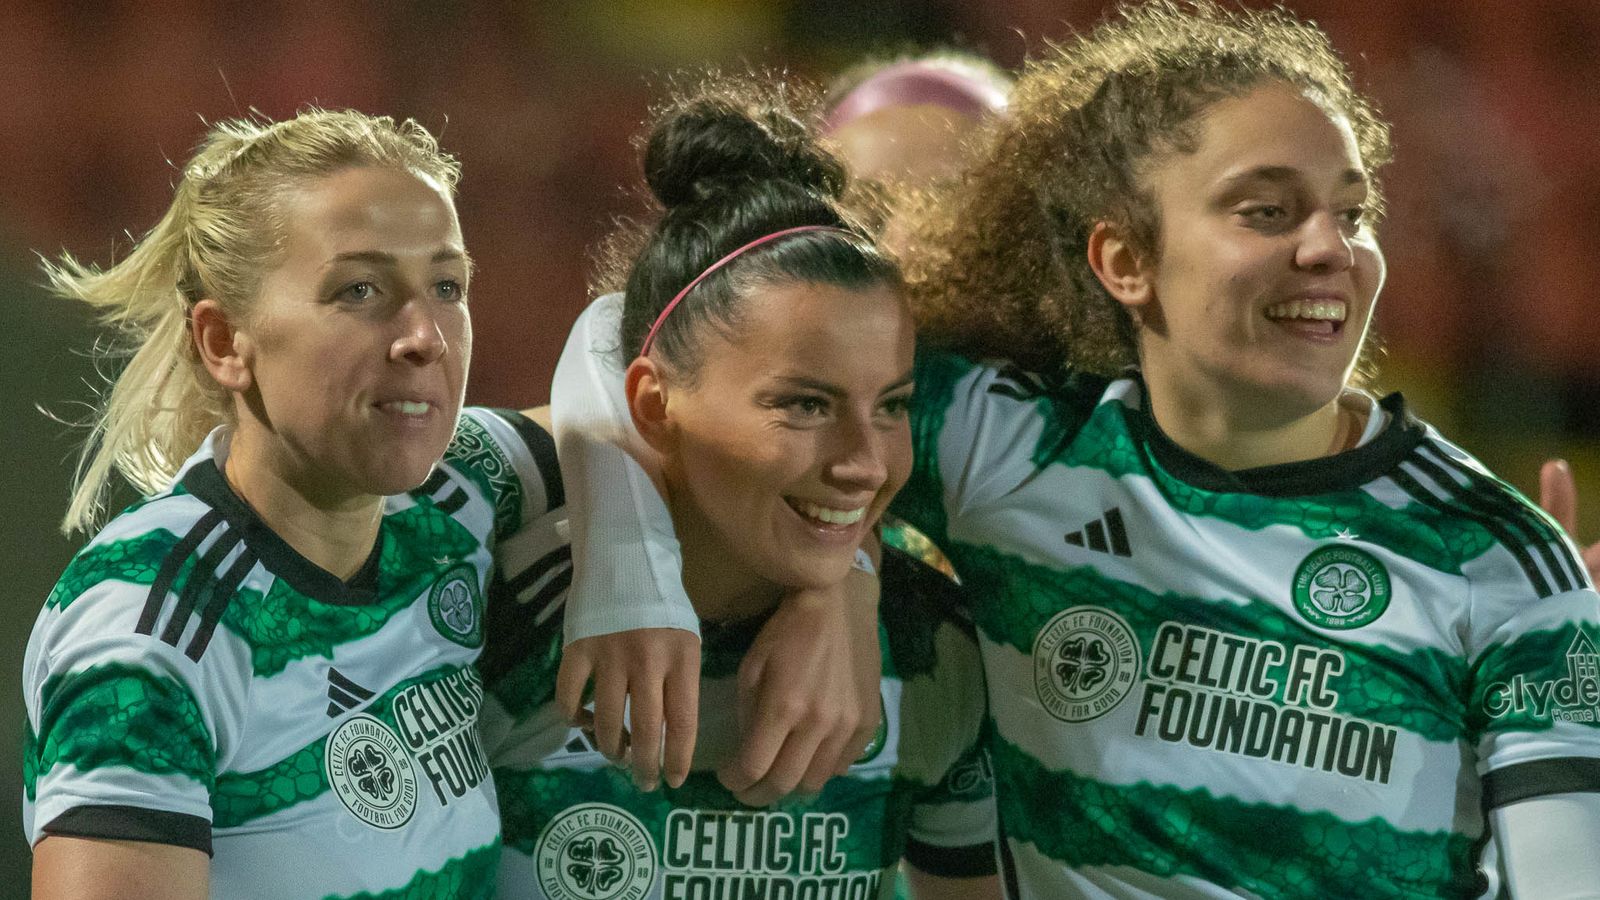 GOAL! 2-0 Amy Gallacher of Celtic scores from a corner and celebrates during the 1/4 final Sky Sports Cup match, Celtic FC vs Glasgow City FC. Excelsior Stadium, Airdrie, 10/11/2023. Image Credit: Colin Poultney/SWPL